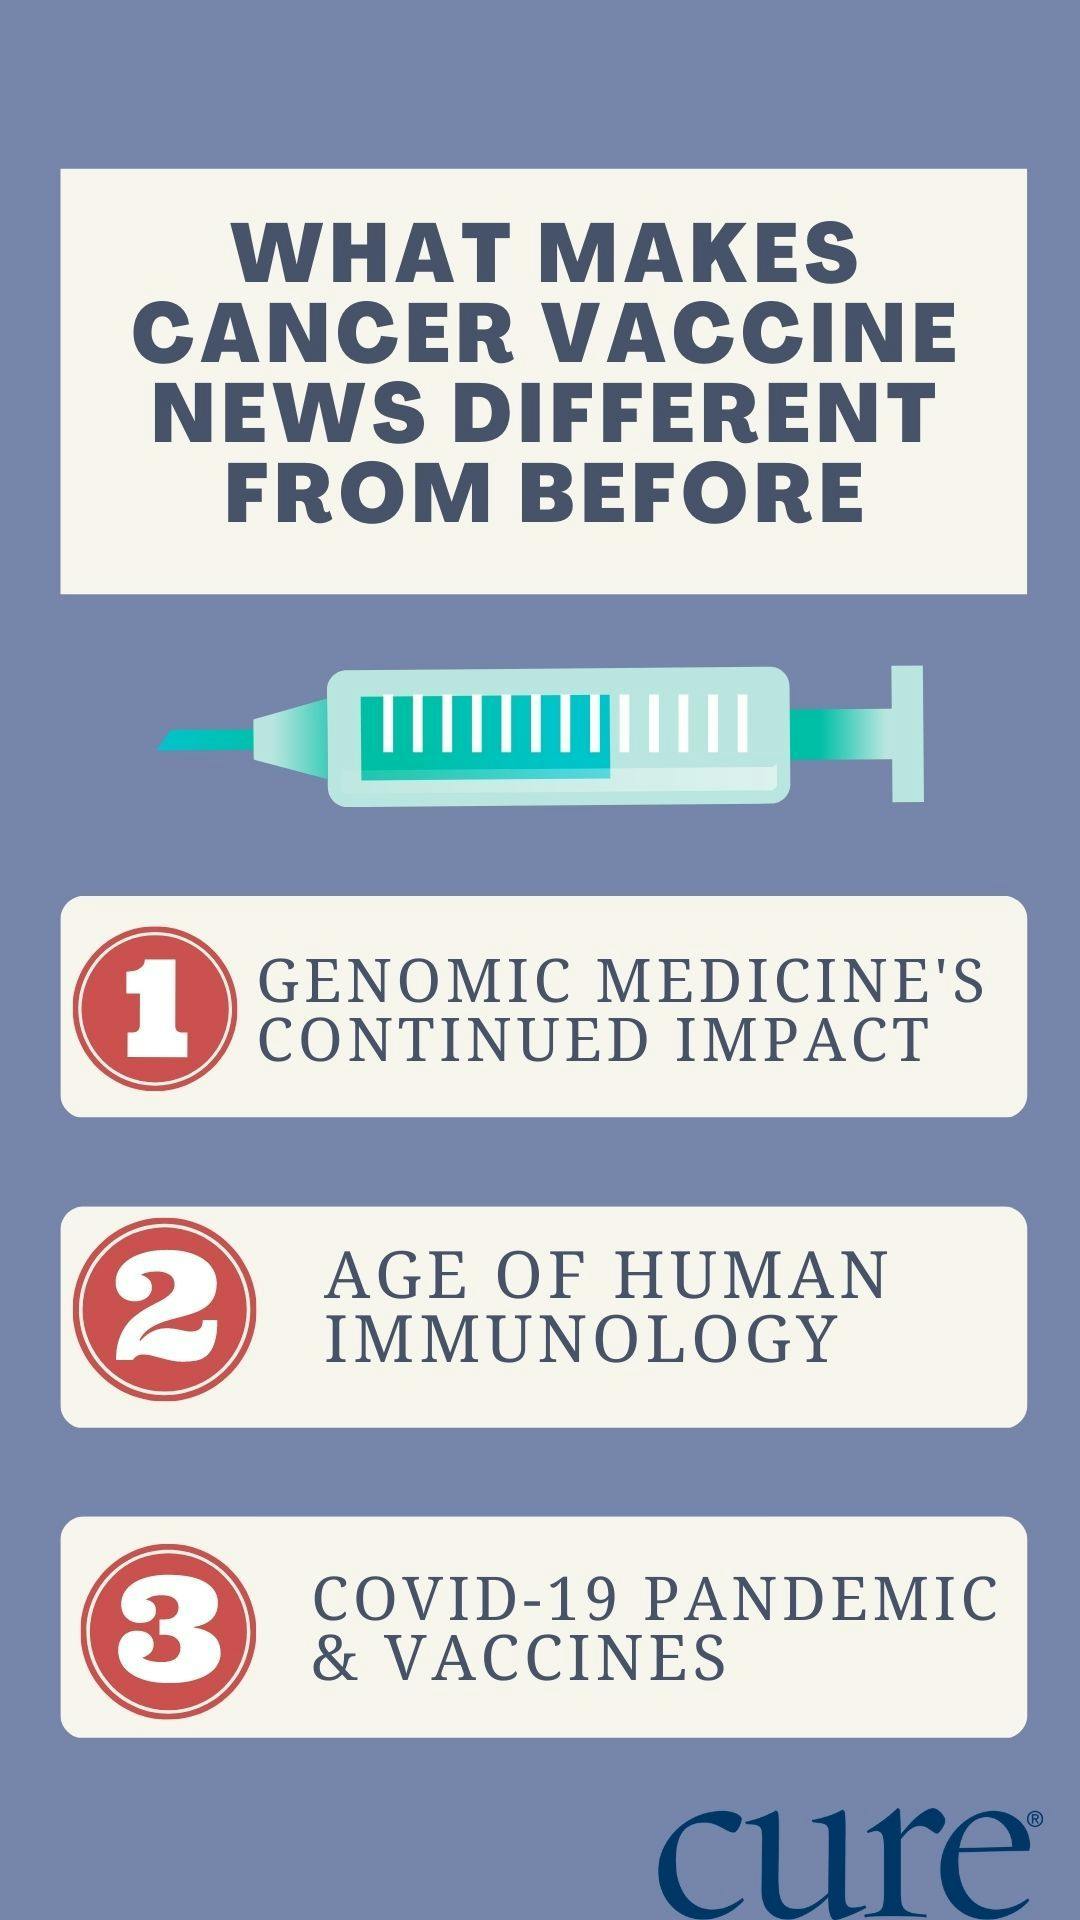 The three things that make recent news about cancer vaccines different than before are continued impact of genomic medicine, age of human immunology and the COVID-19 pandemic and vaccines, according to Dr. Catherine J. Wu. 